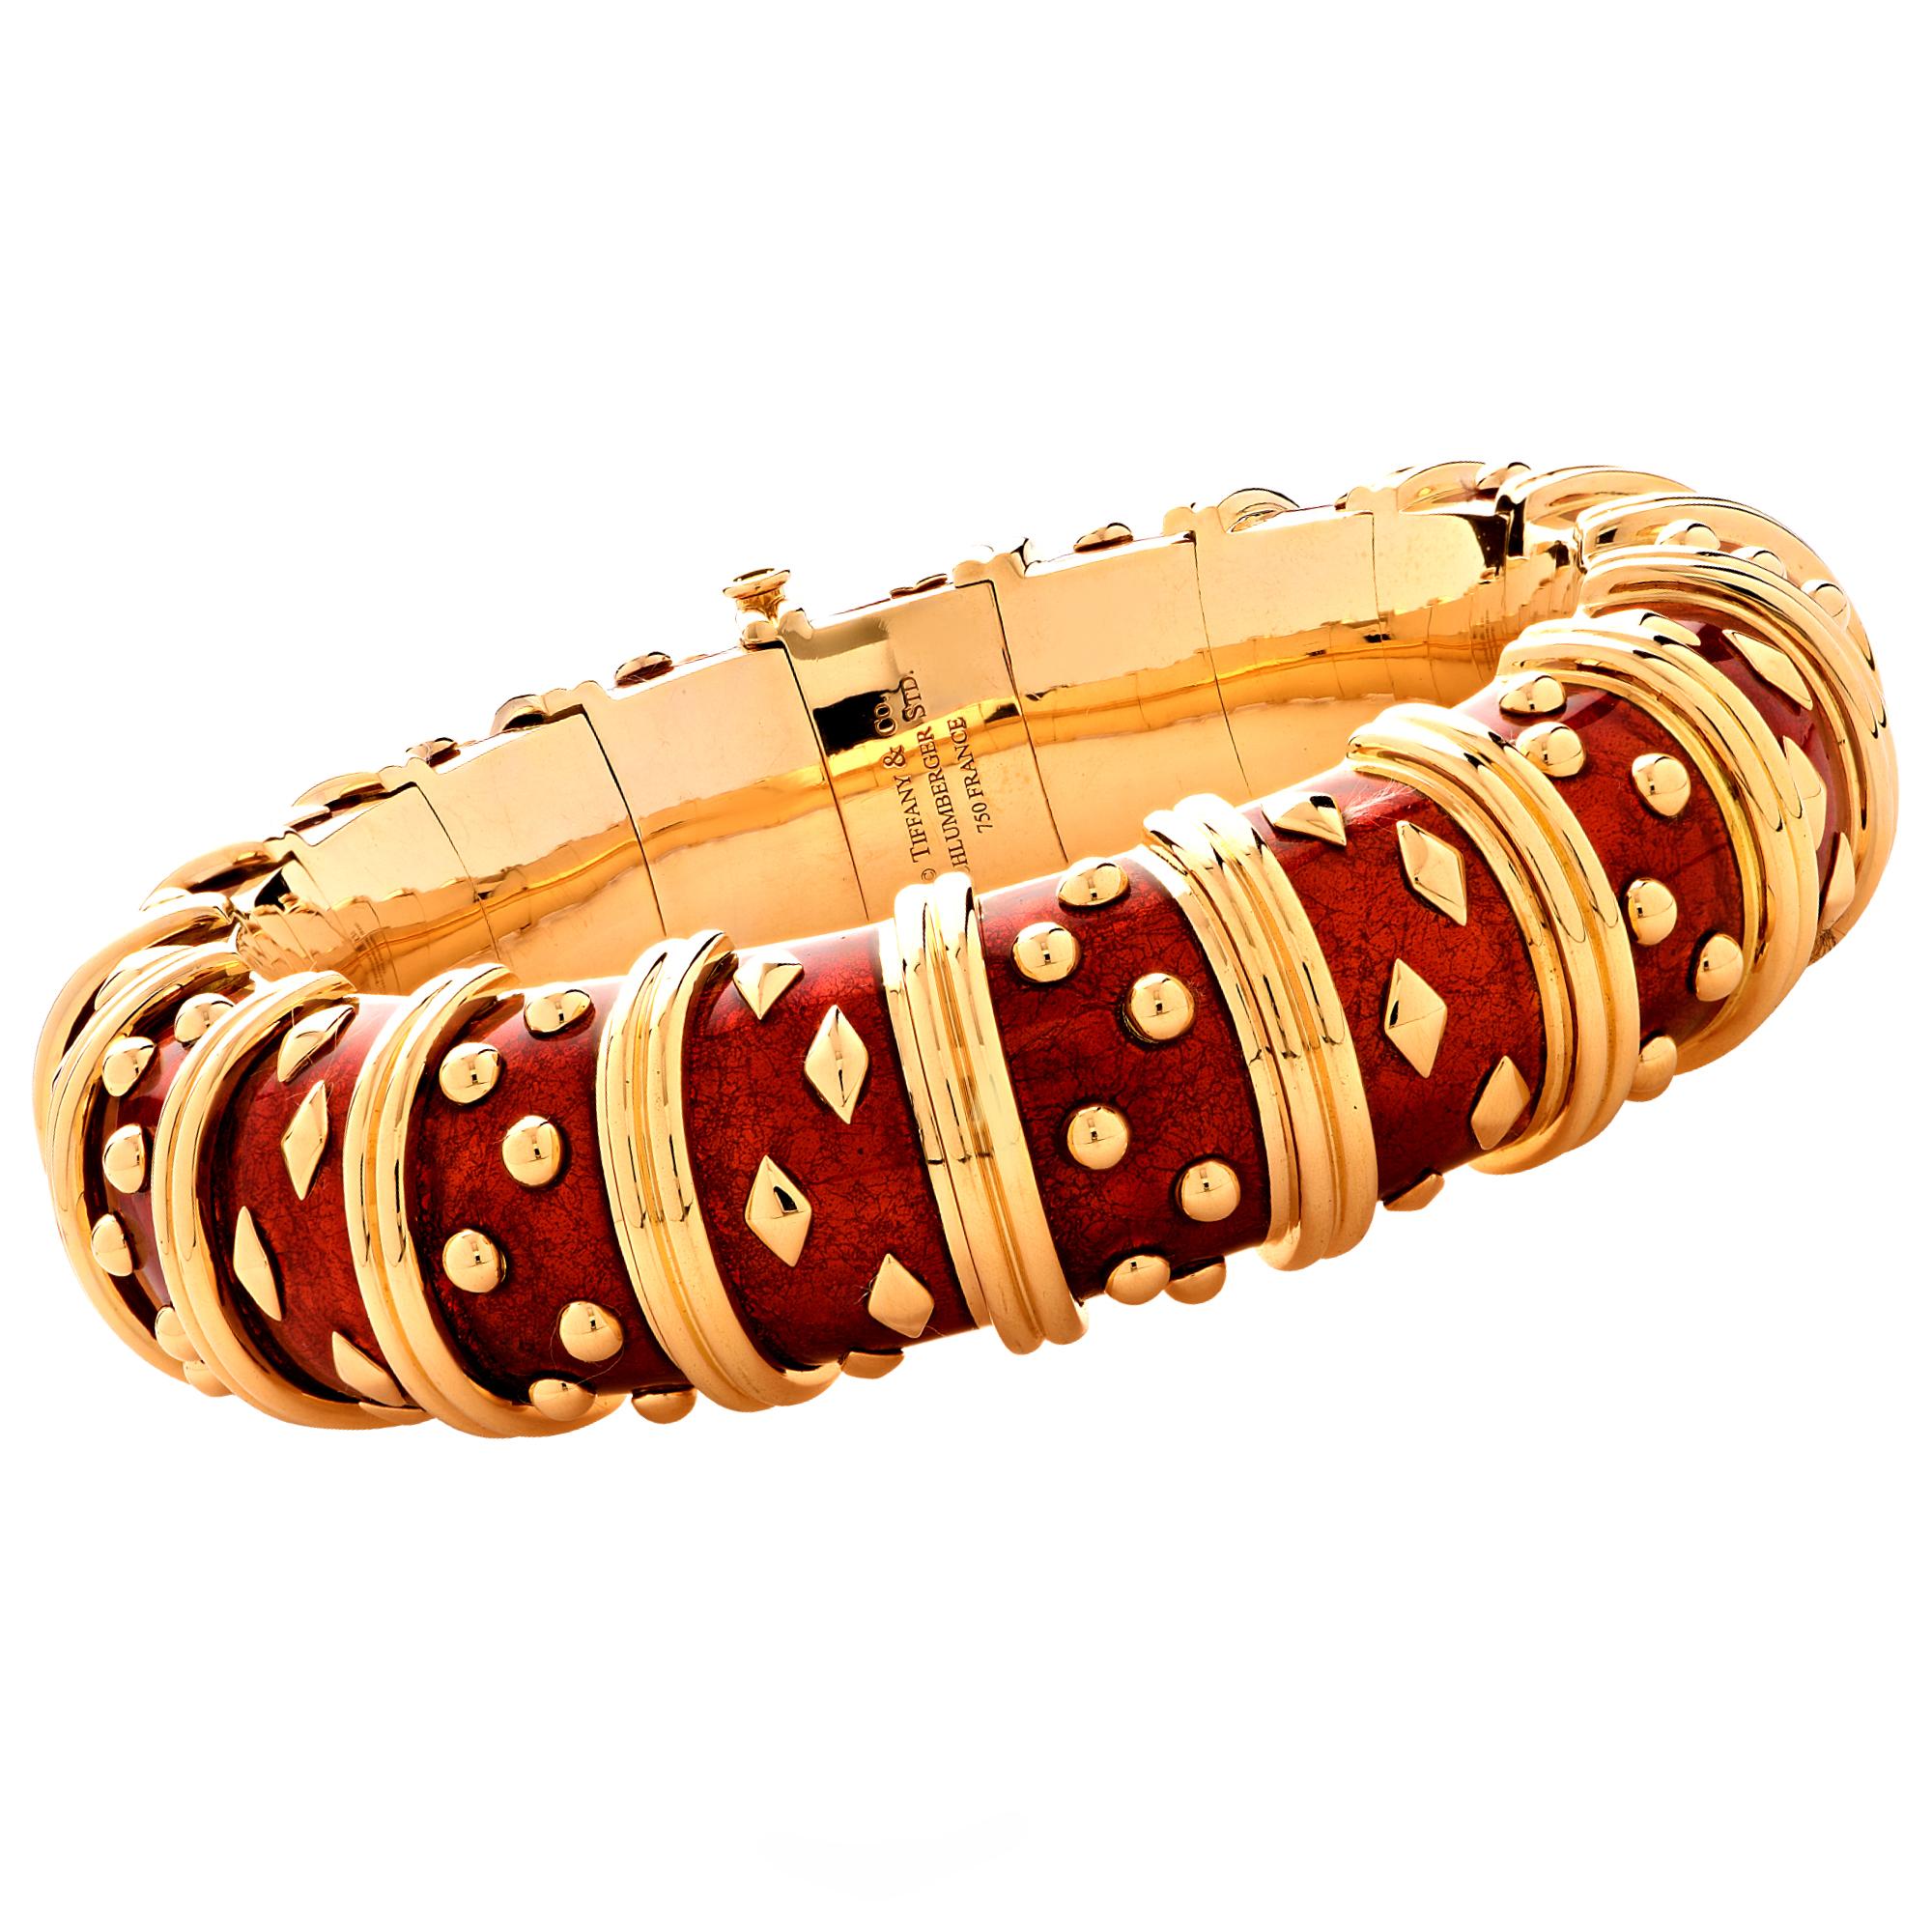 Stunning Tiffany & Co. Schlumberger Dot Losange Bracelet, crafted in 18k yellow gold and enriched with vibrant crimson red enamel, accented with alternating clusters of gold dots and diamond shapes, separated by gold rings. The bracelet measures .7